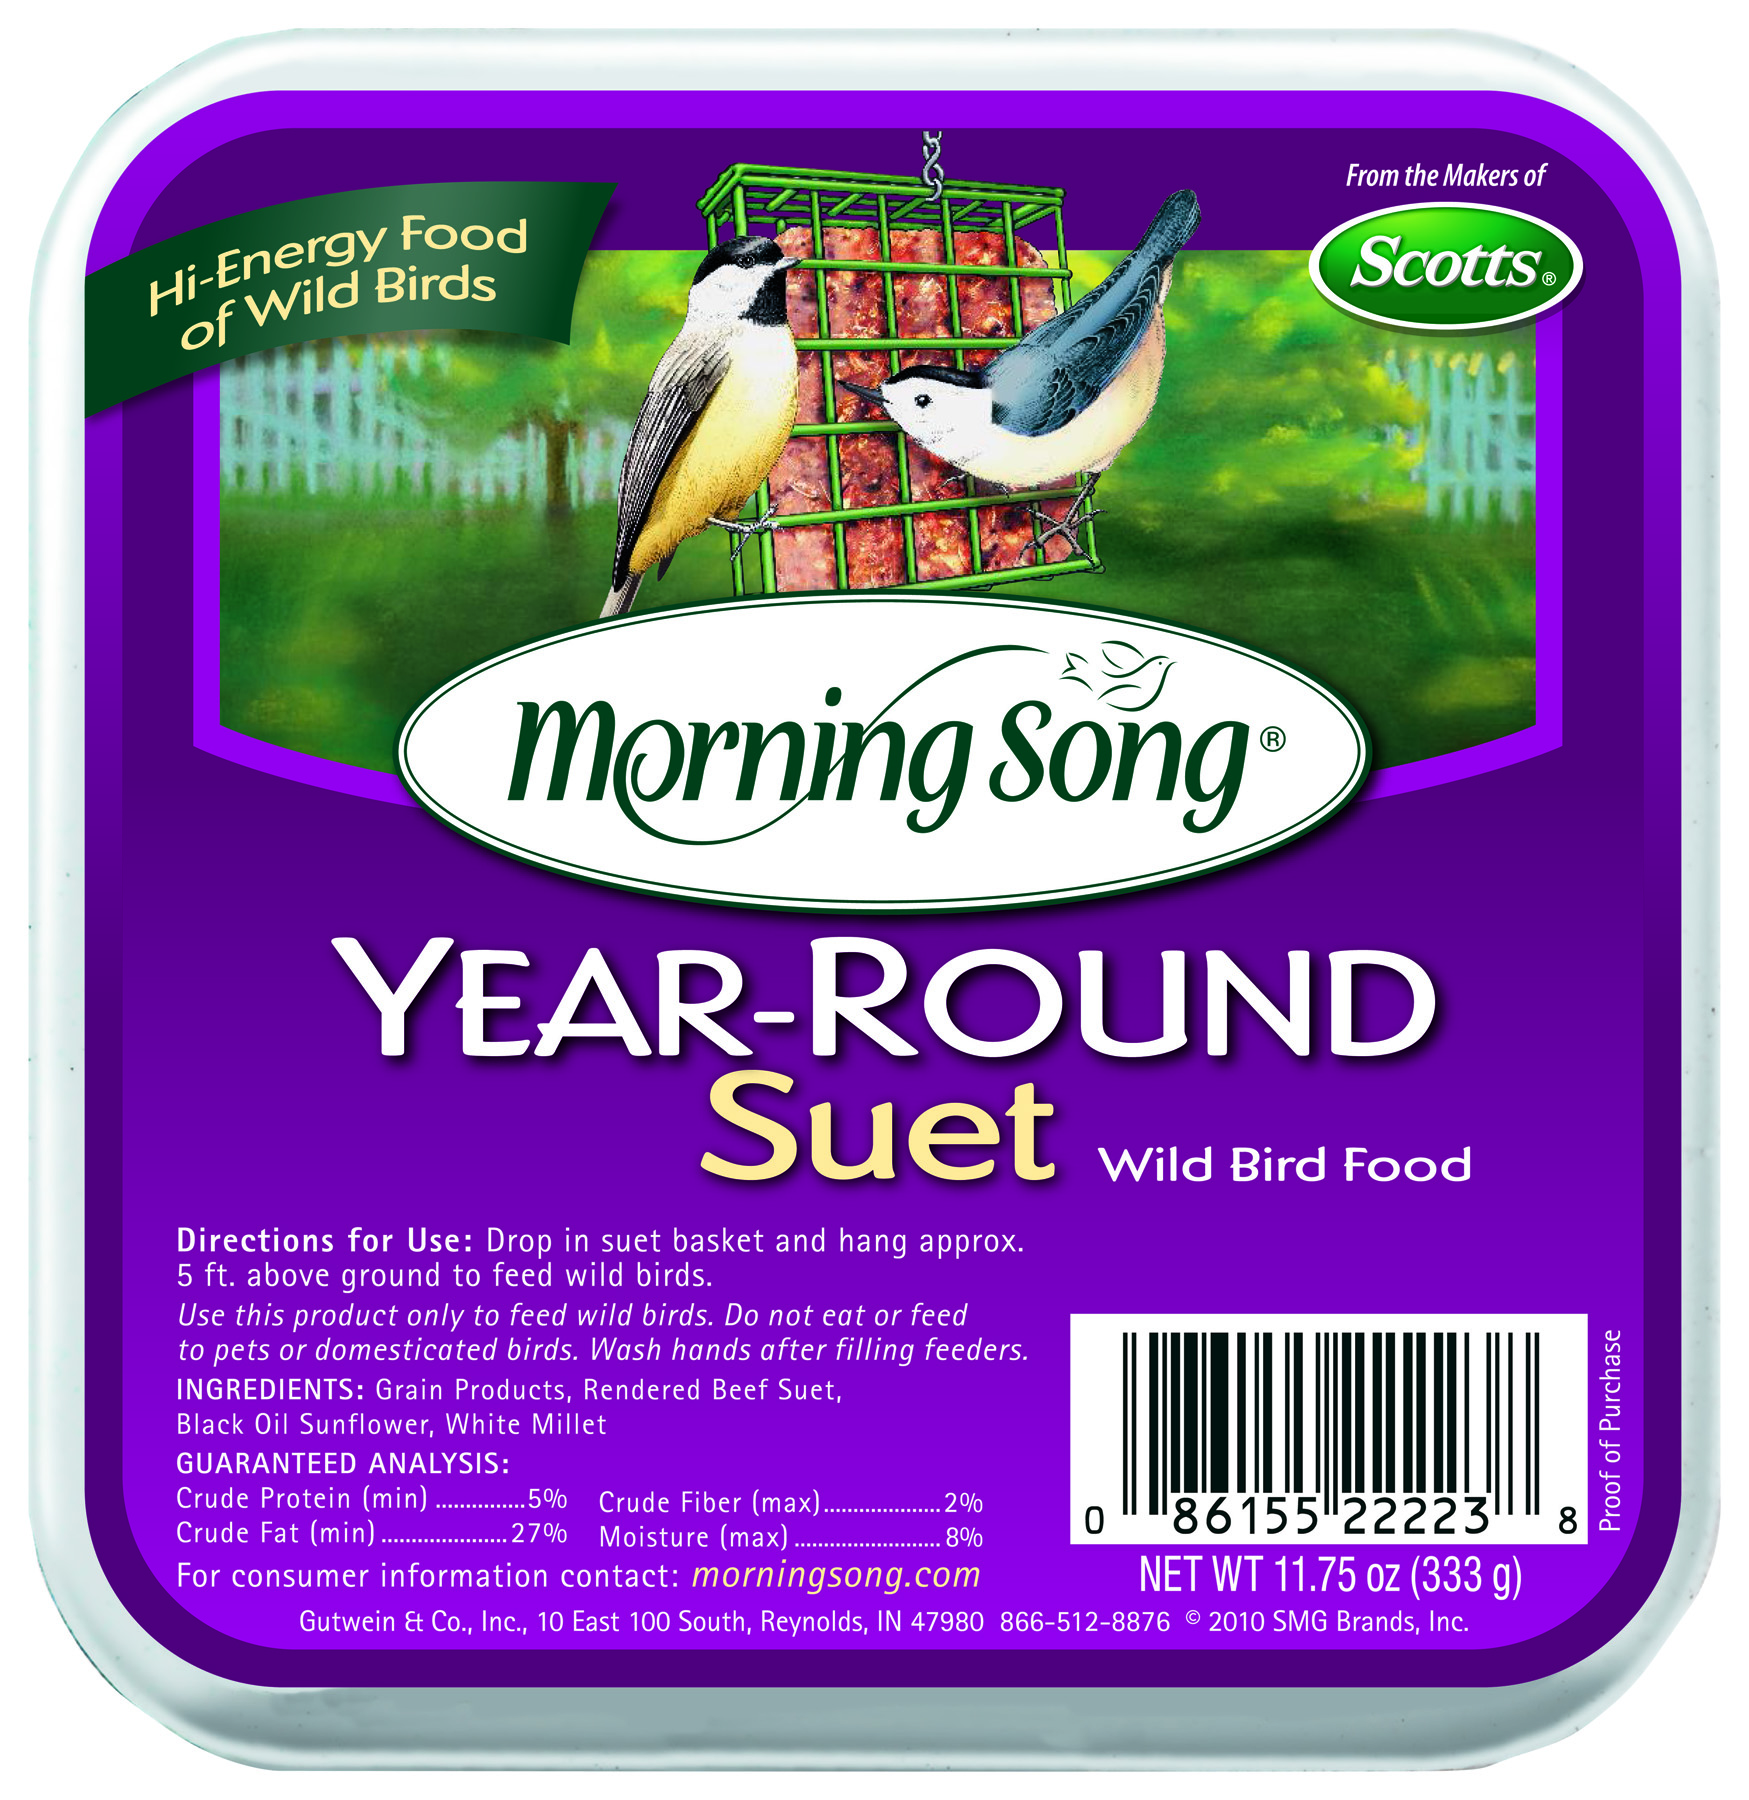 MORNING SONG YEAR-ROUND SUET